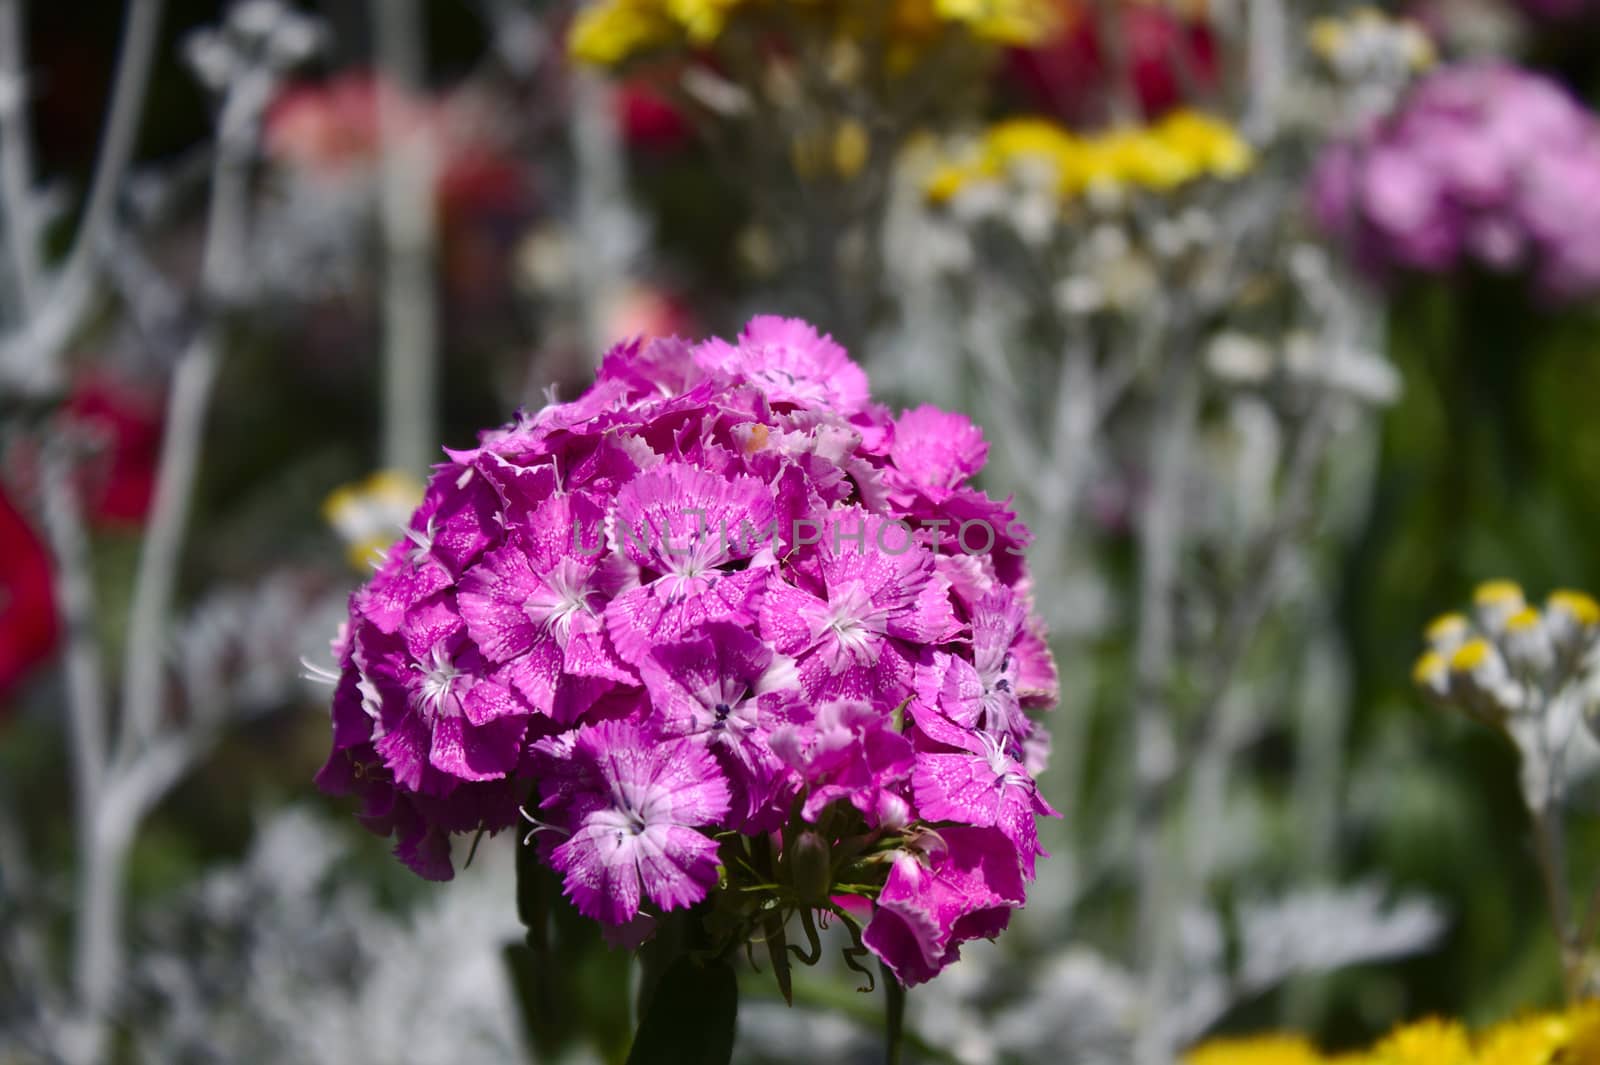 The picture shows pink carnation in the garden